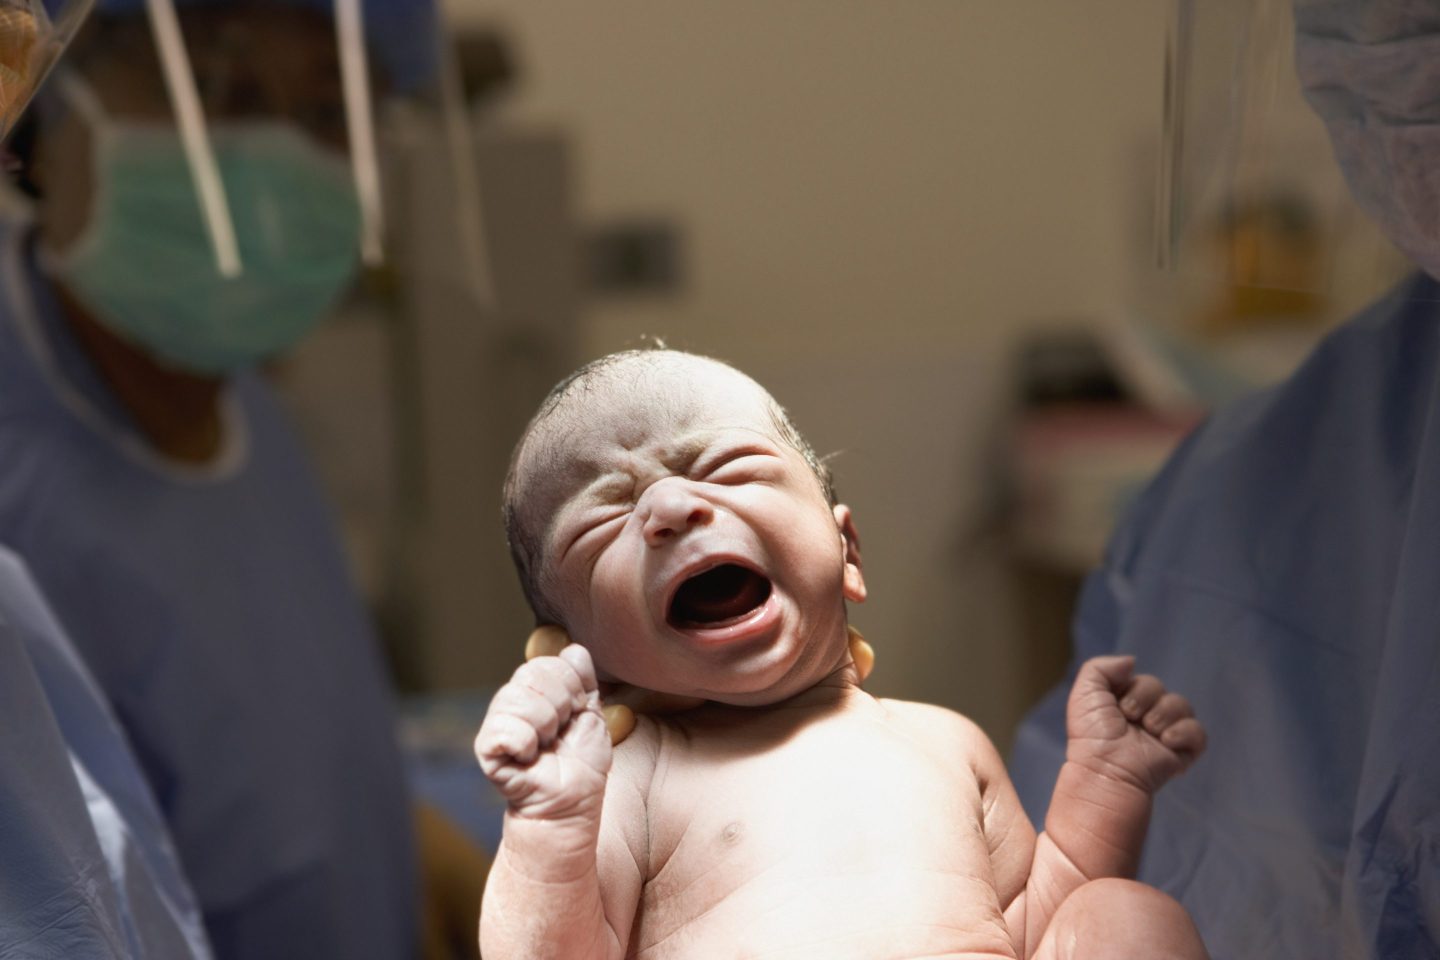 Newborn baby crying in operating room